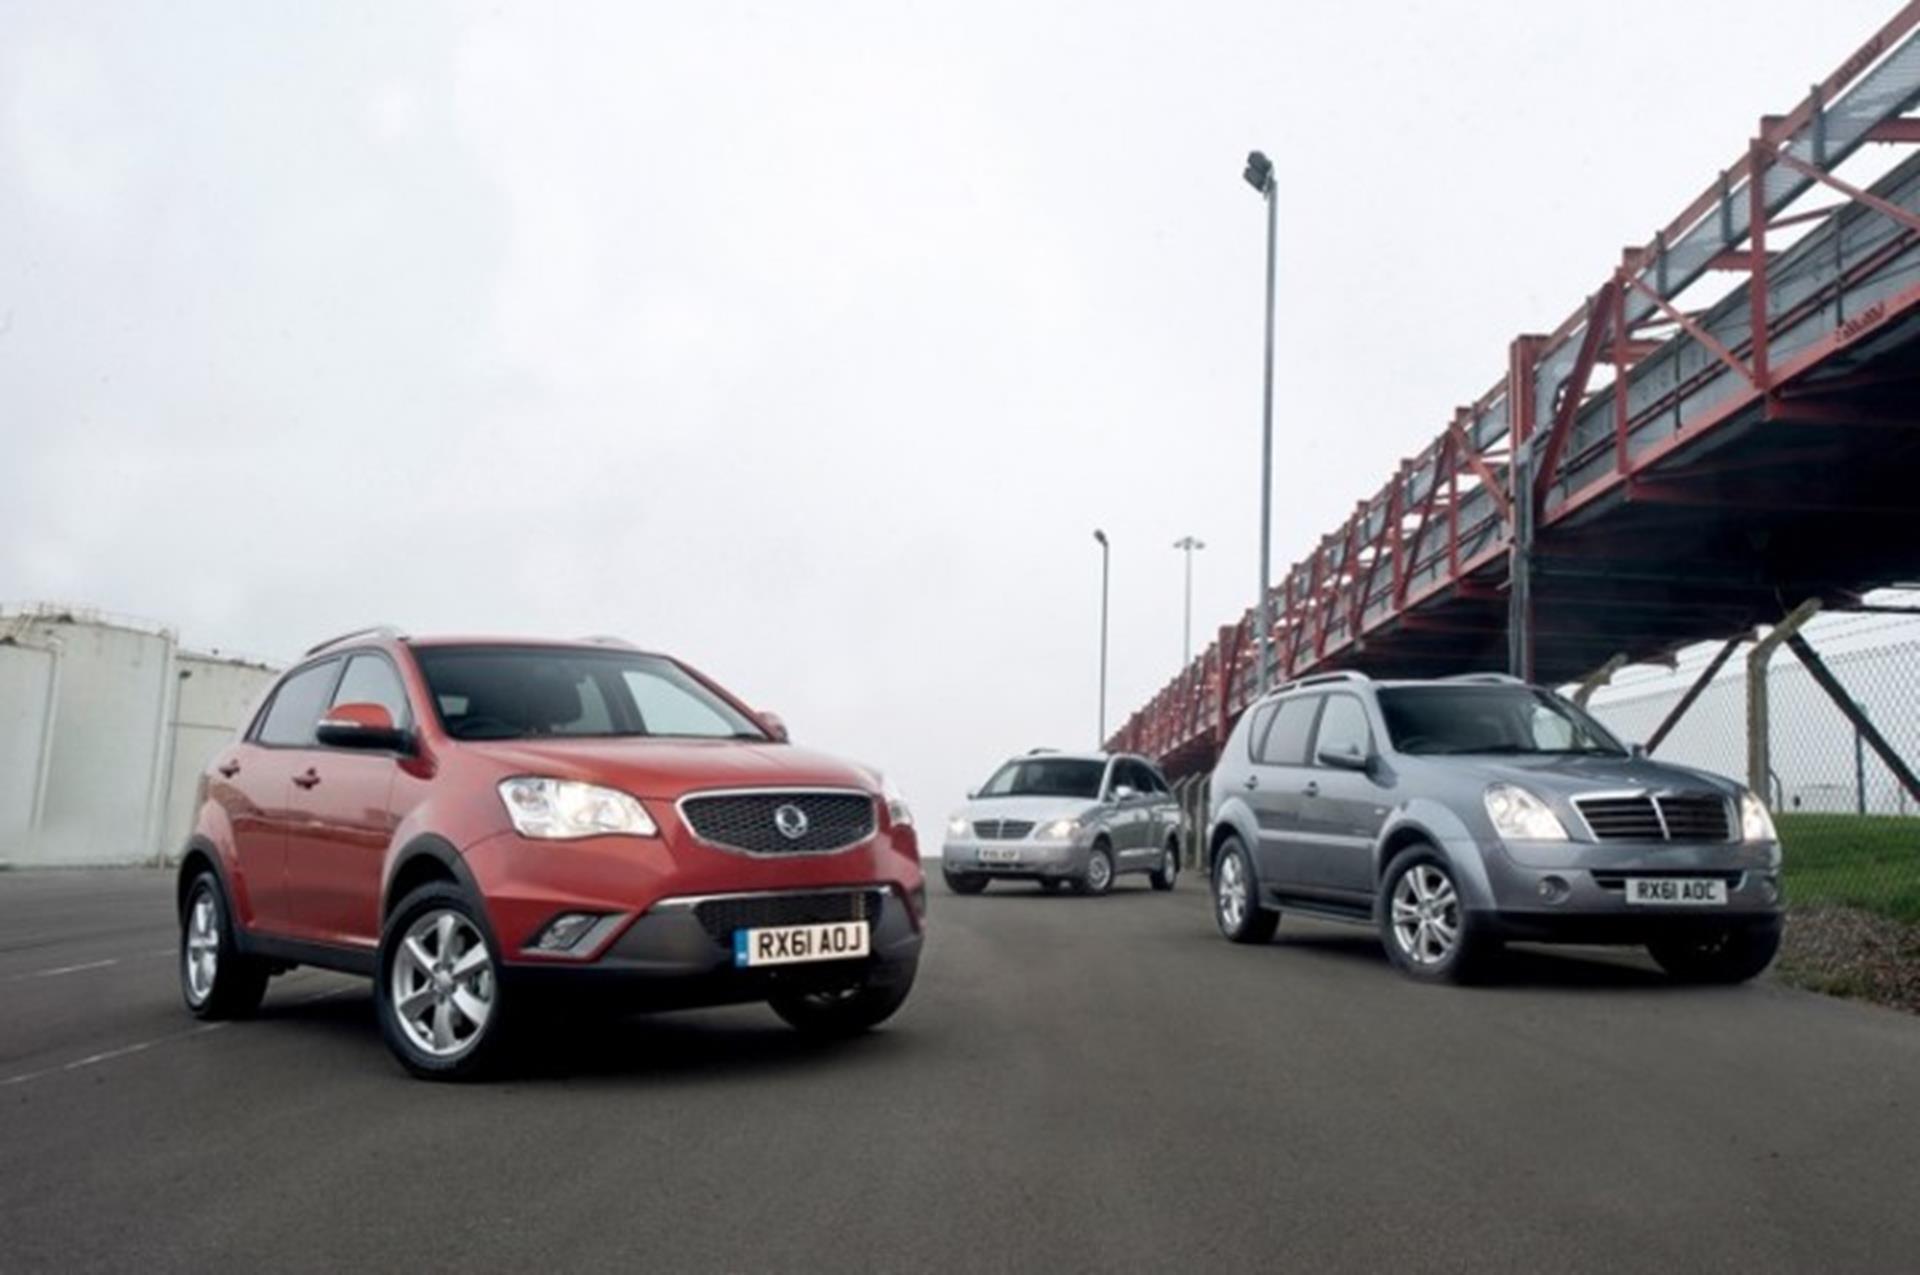 SSANGYONG APPOINTS NEW DEALER FOR RUSTINGTON